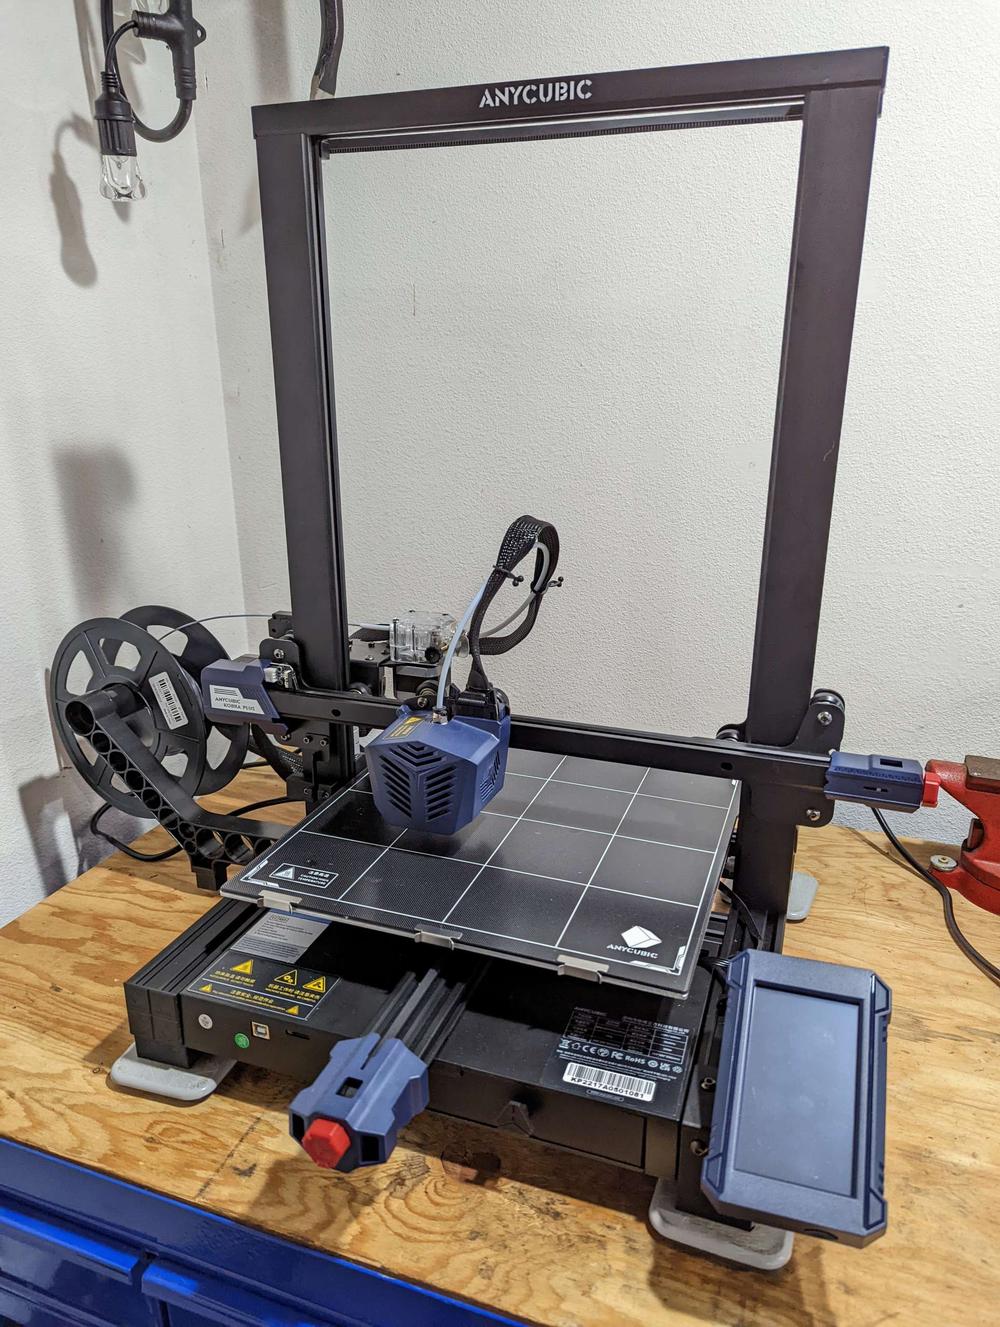 A black and blue Anycubic 3D printer is printing a blue object on a glass bed.